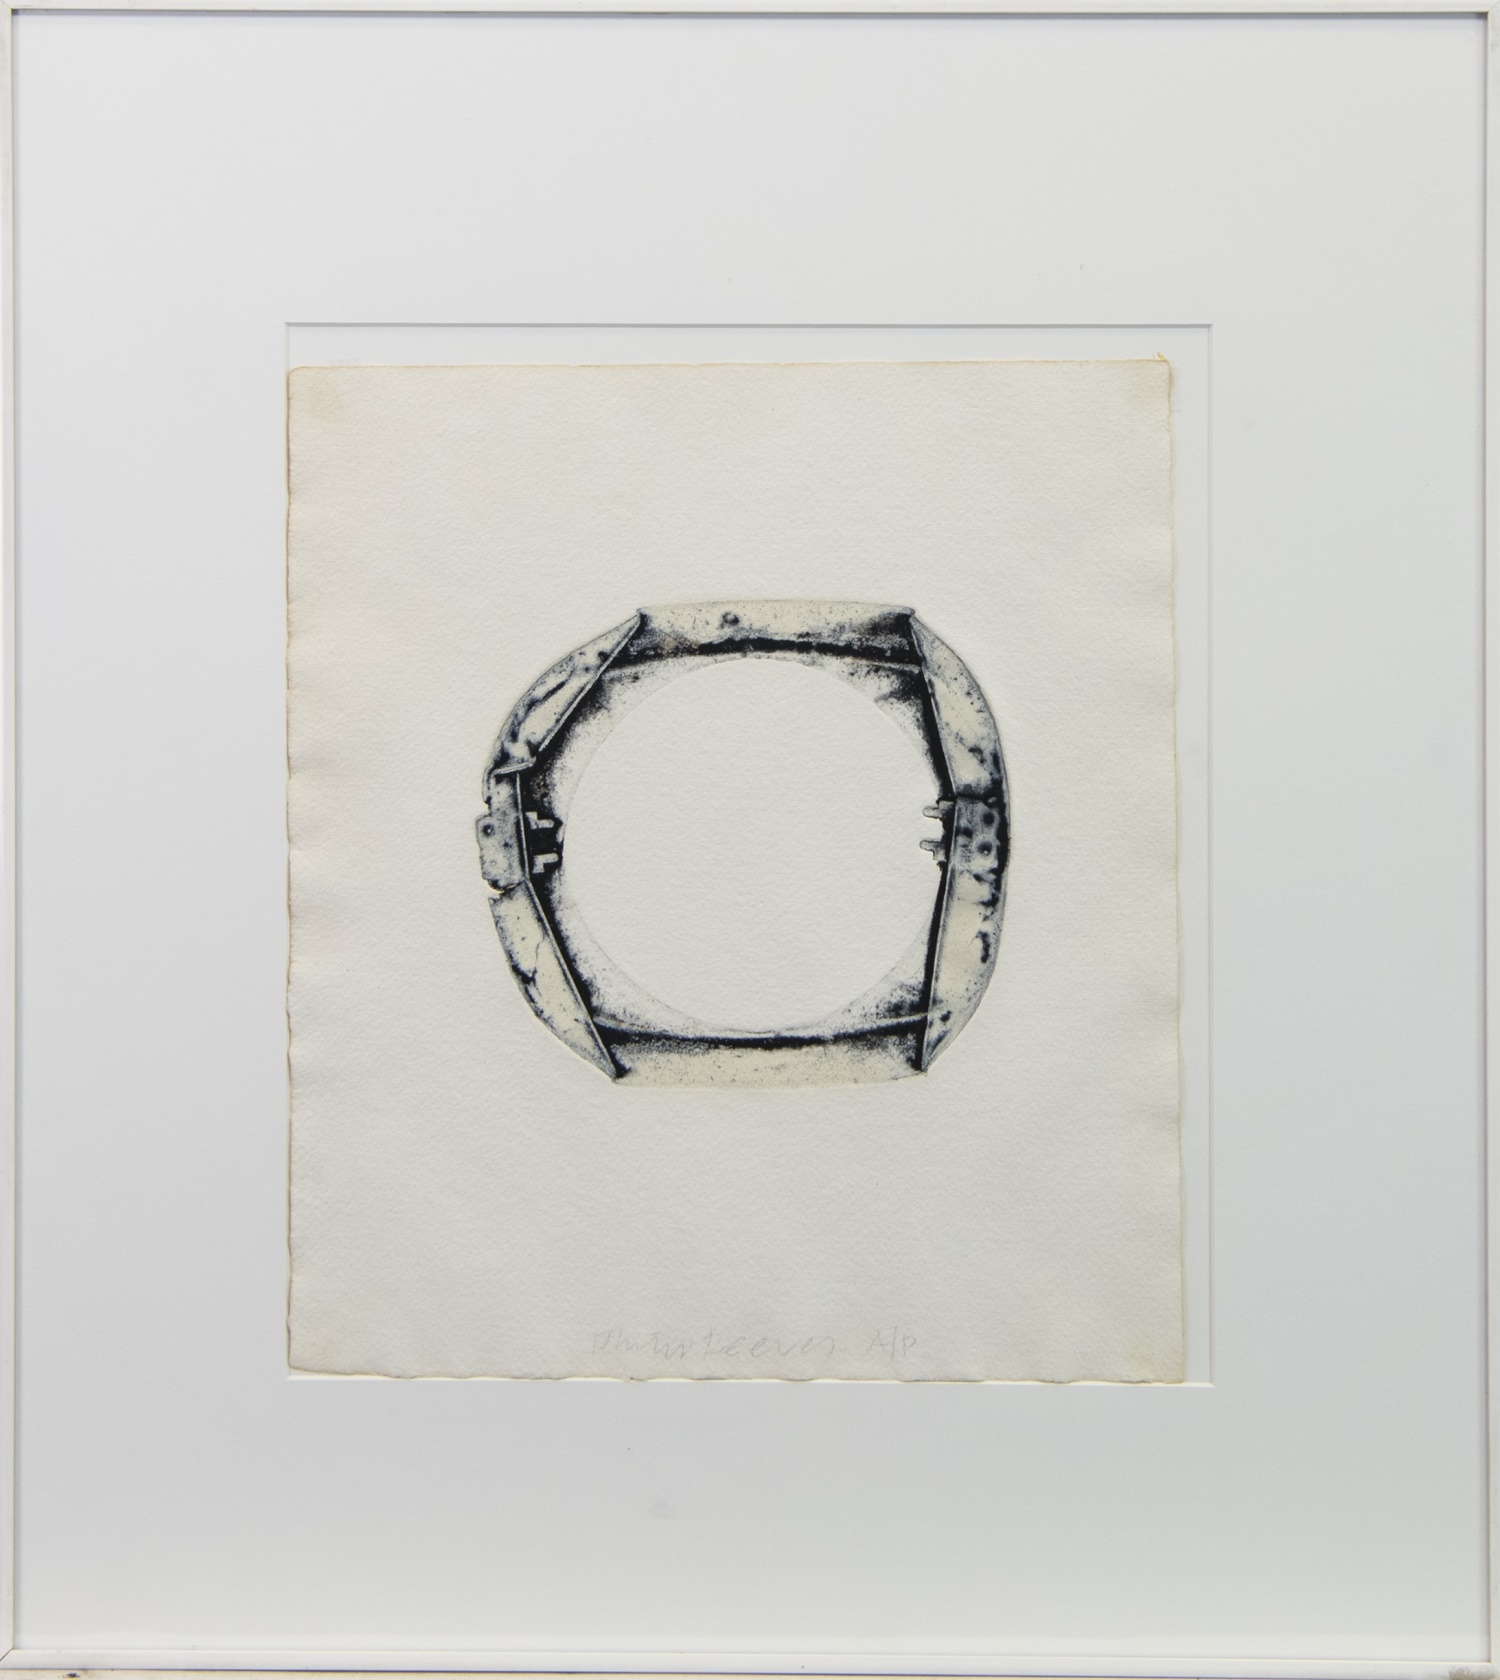 FRAGMENT, A PRINT BY PHILIP REEVES